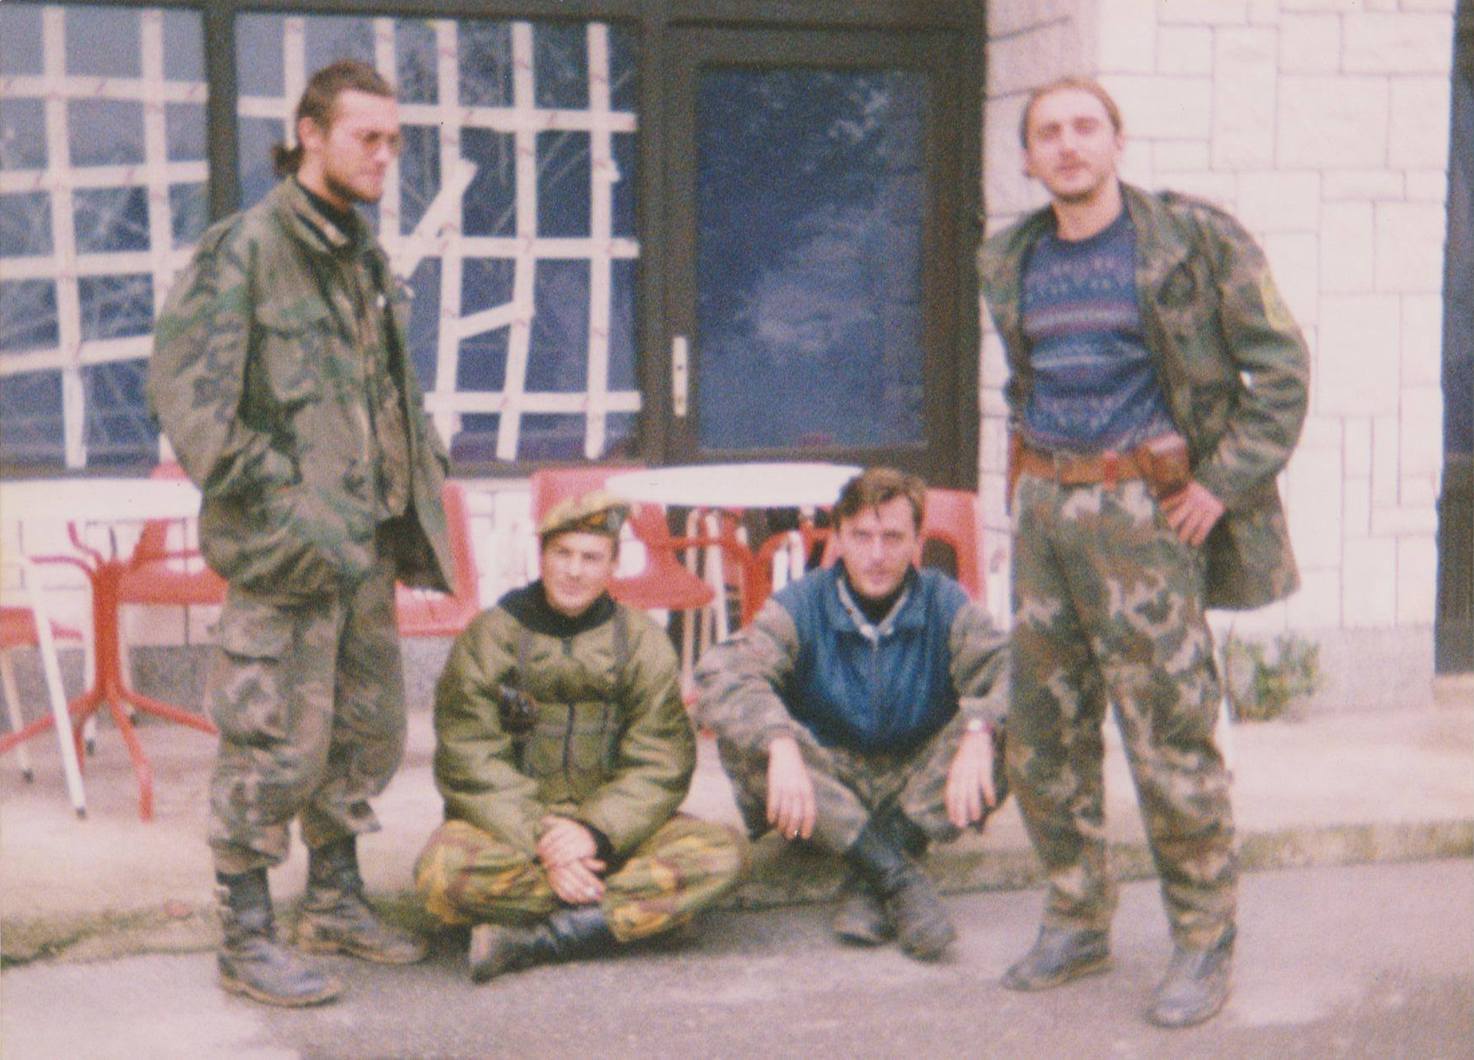 Šehić (on the right) with his comrades during the war. Image: Hari Palić, who died in battle in 1995.